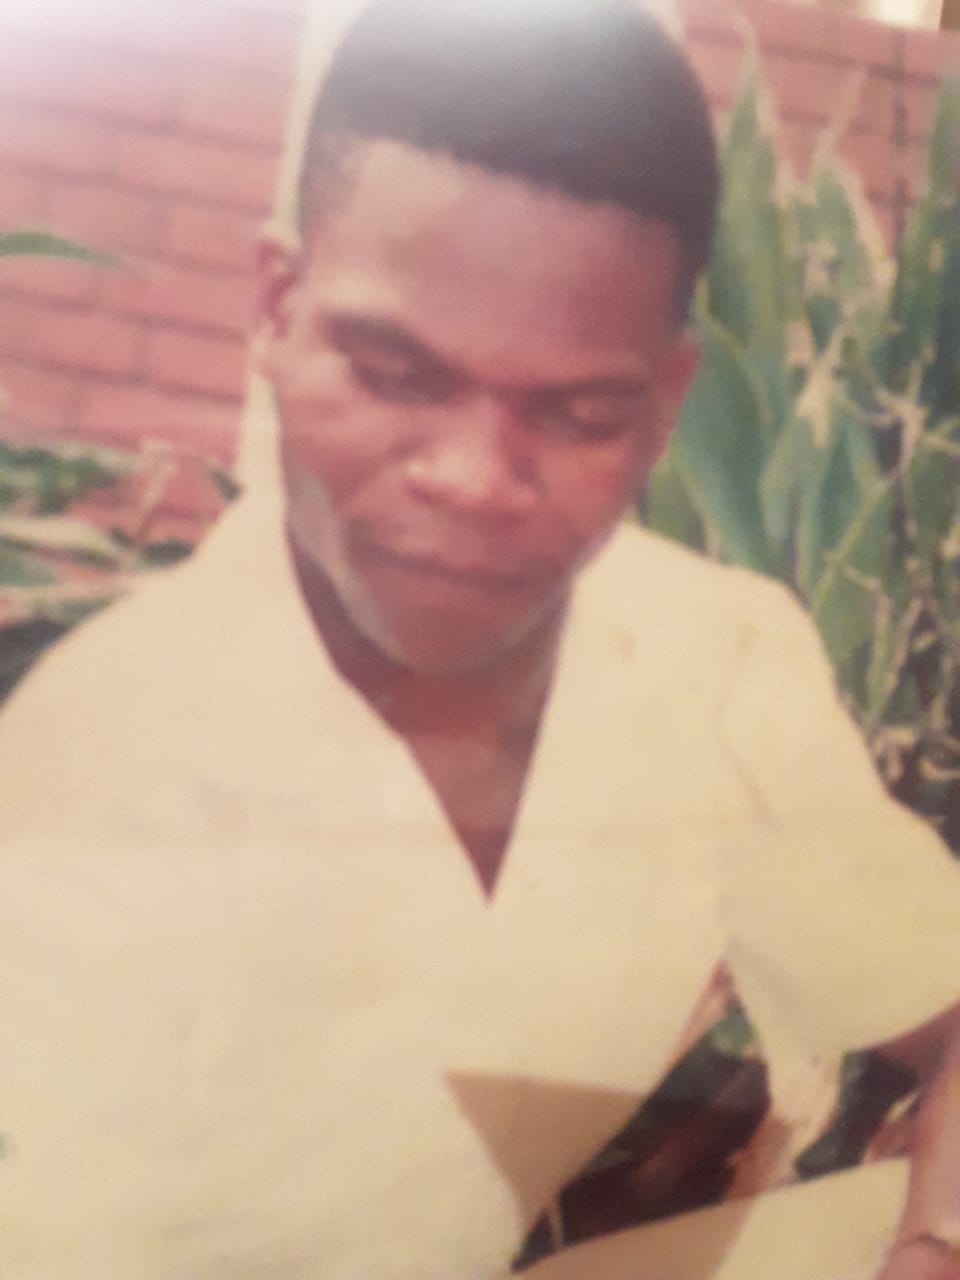 Help Polokwane police reunite a missing man with family